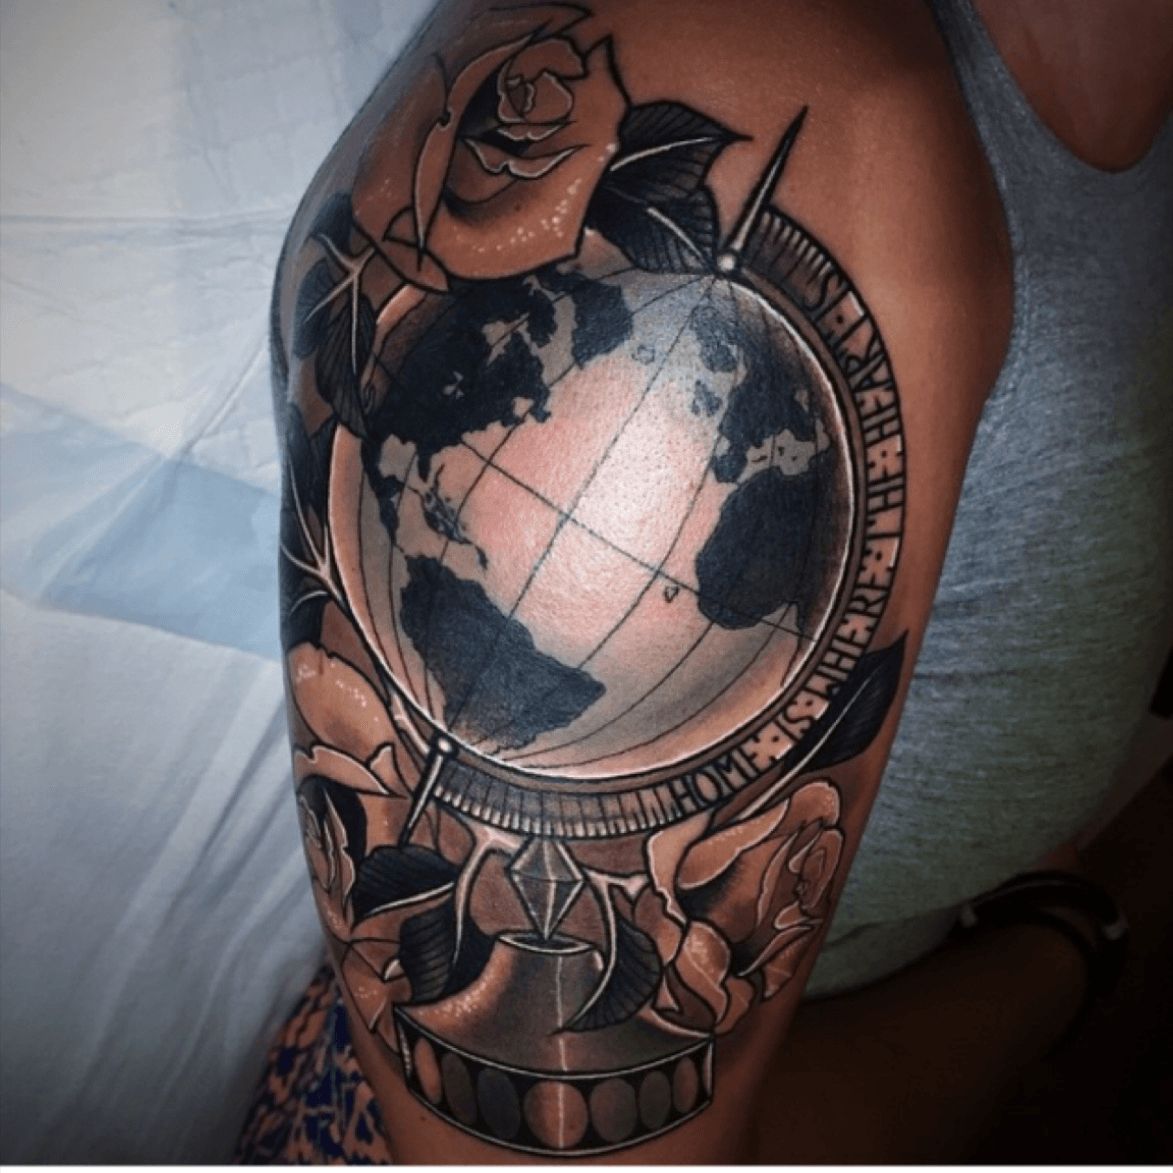 Compass  Anchor Tattoo on the Globe Symbolism Meaning and Significance   Black Poison Tattoos